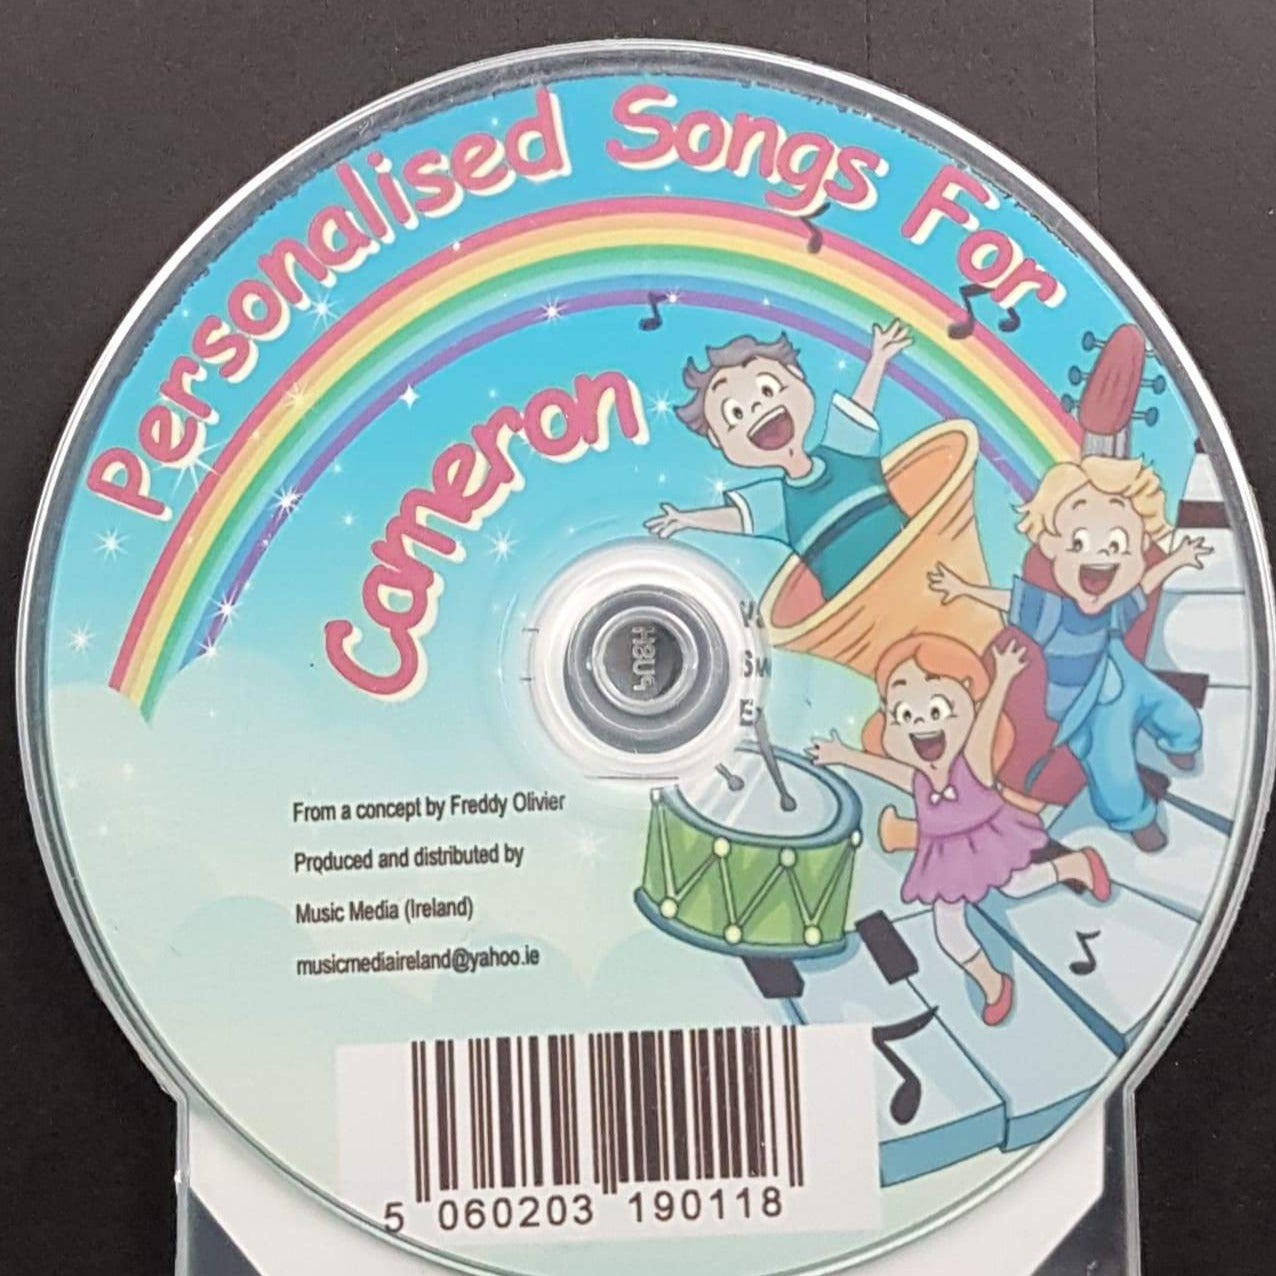 CD - Personalised Children's Songs / Cameron